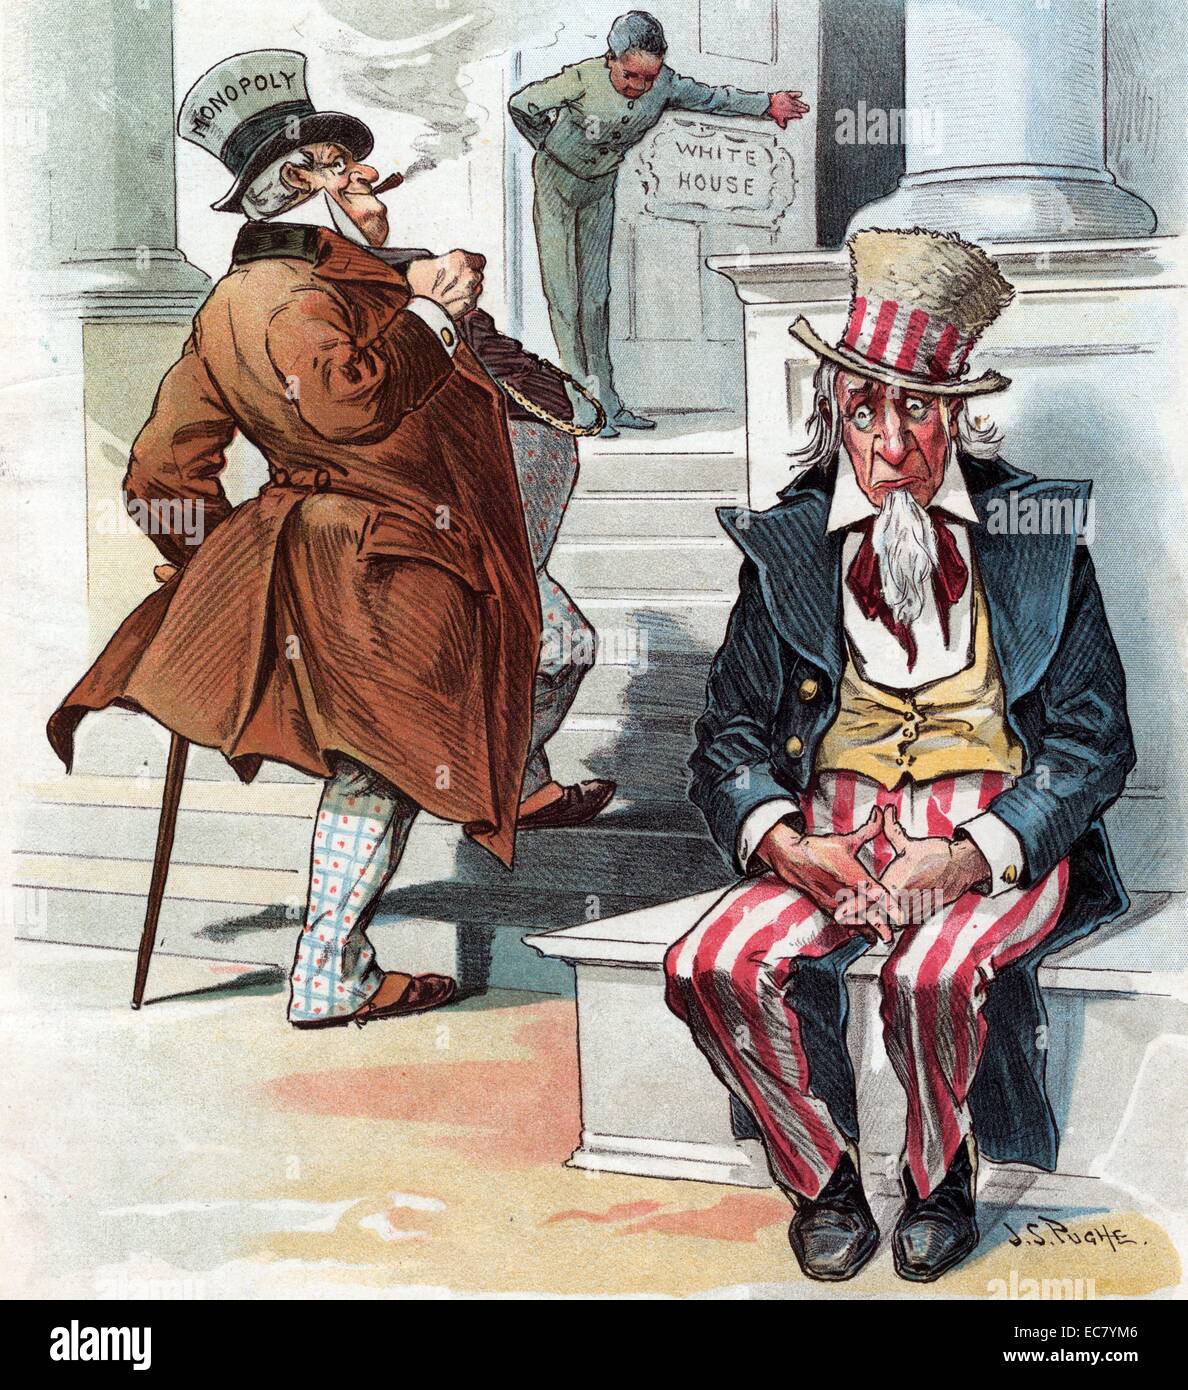 When McKinley is president' Uncle Sam sitting on the steps to the White House as a man (McKinley) wearing a top hat labelled 'Monopoly' walks up the steps to enter the White House. Stock Photo